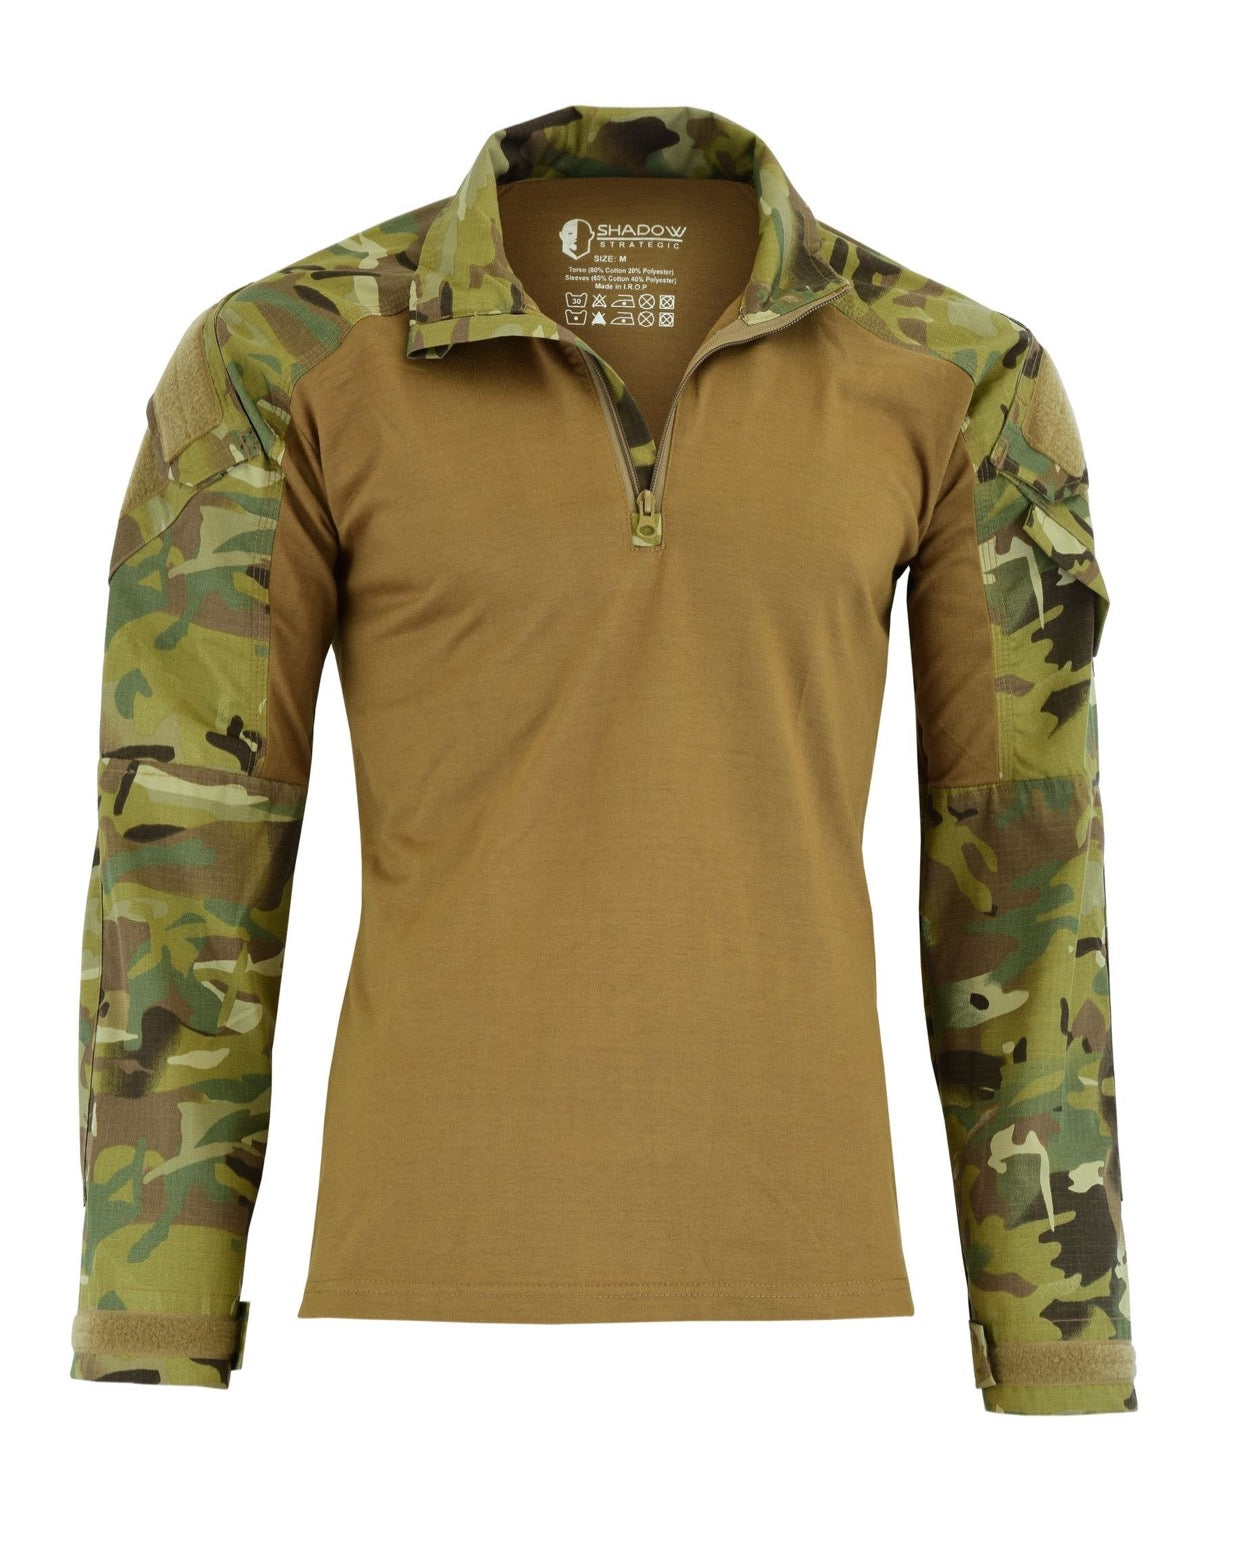 Tactical Zone HYBRID TACTICAL SHIRT IS A PERFECT COMBAT SHIRT Colour UTP front